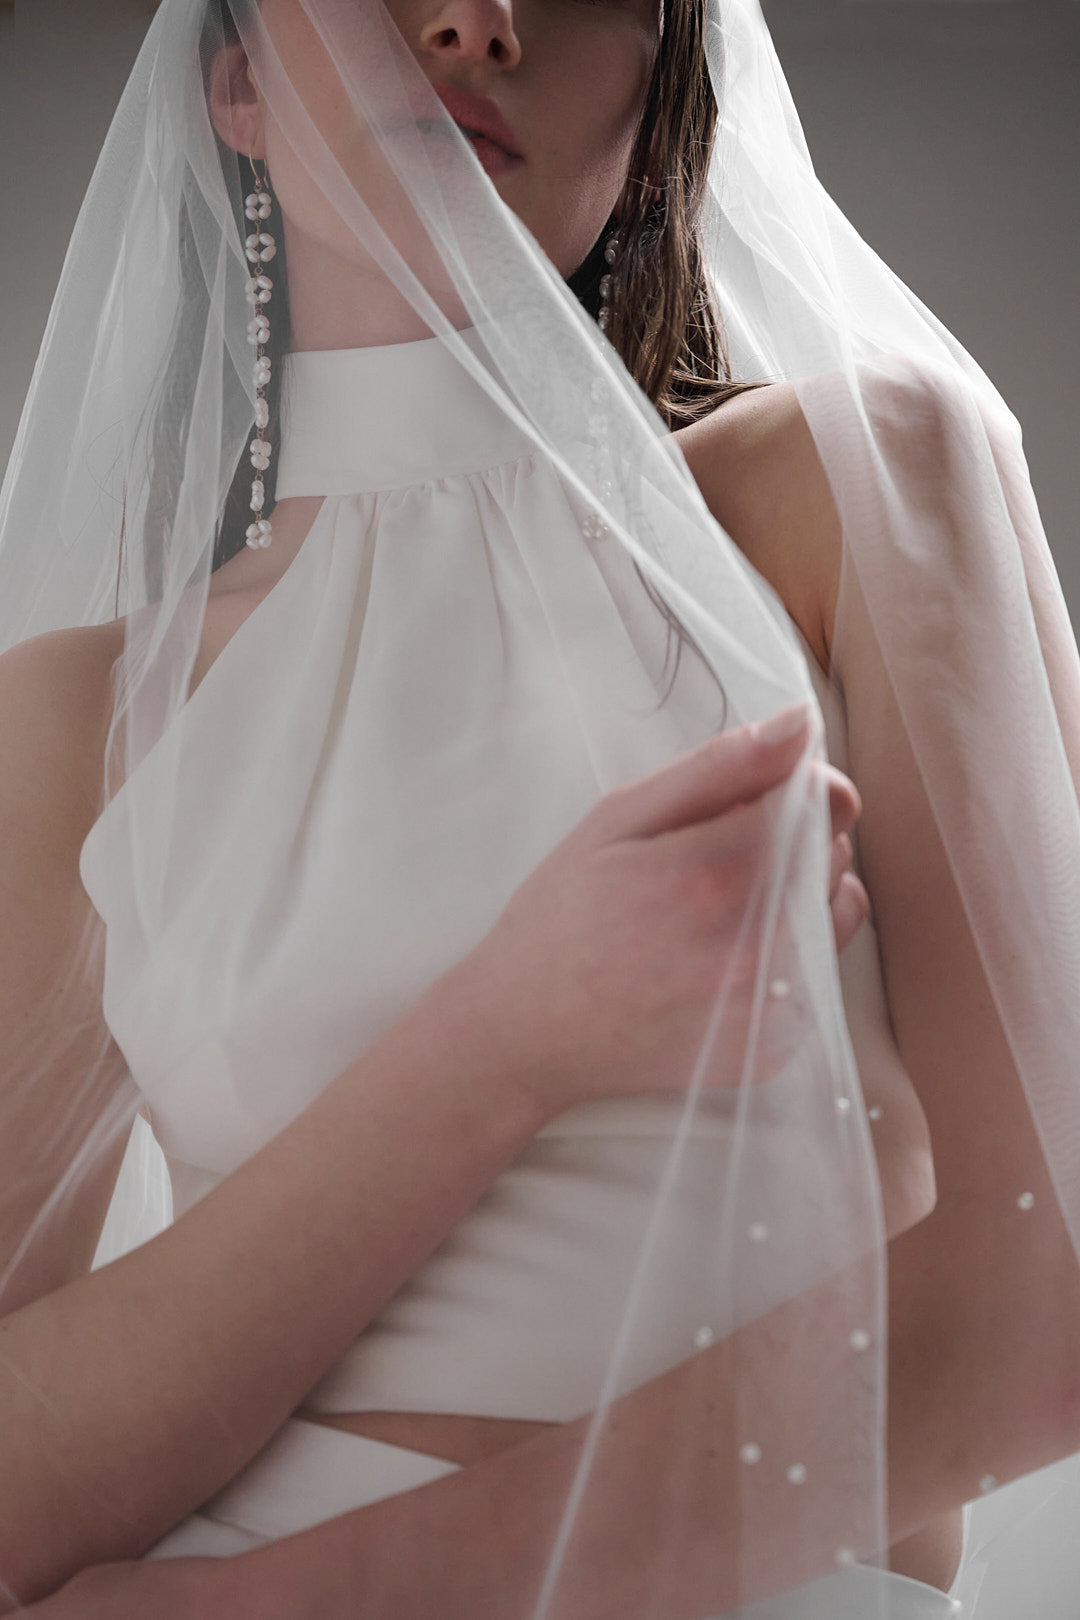 A delicate and elegant veil with scattered pearls that extends down to the chapel length, perfect for a timeless and romantic bridal look.